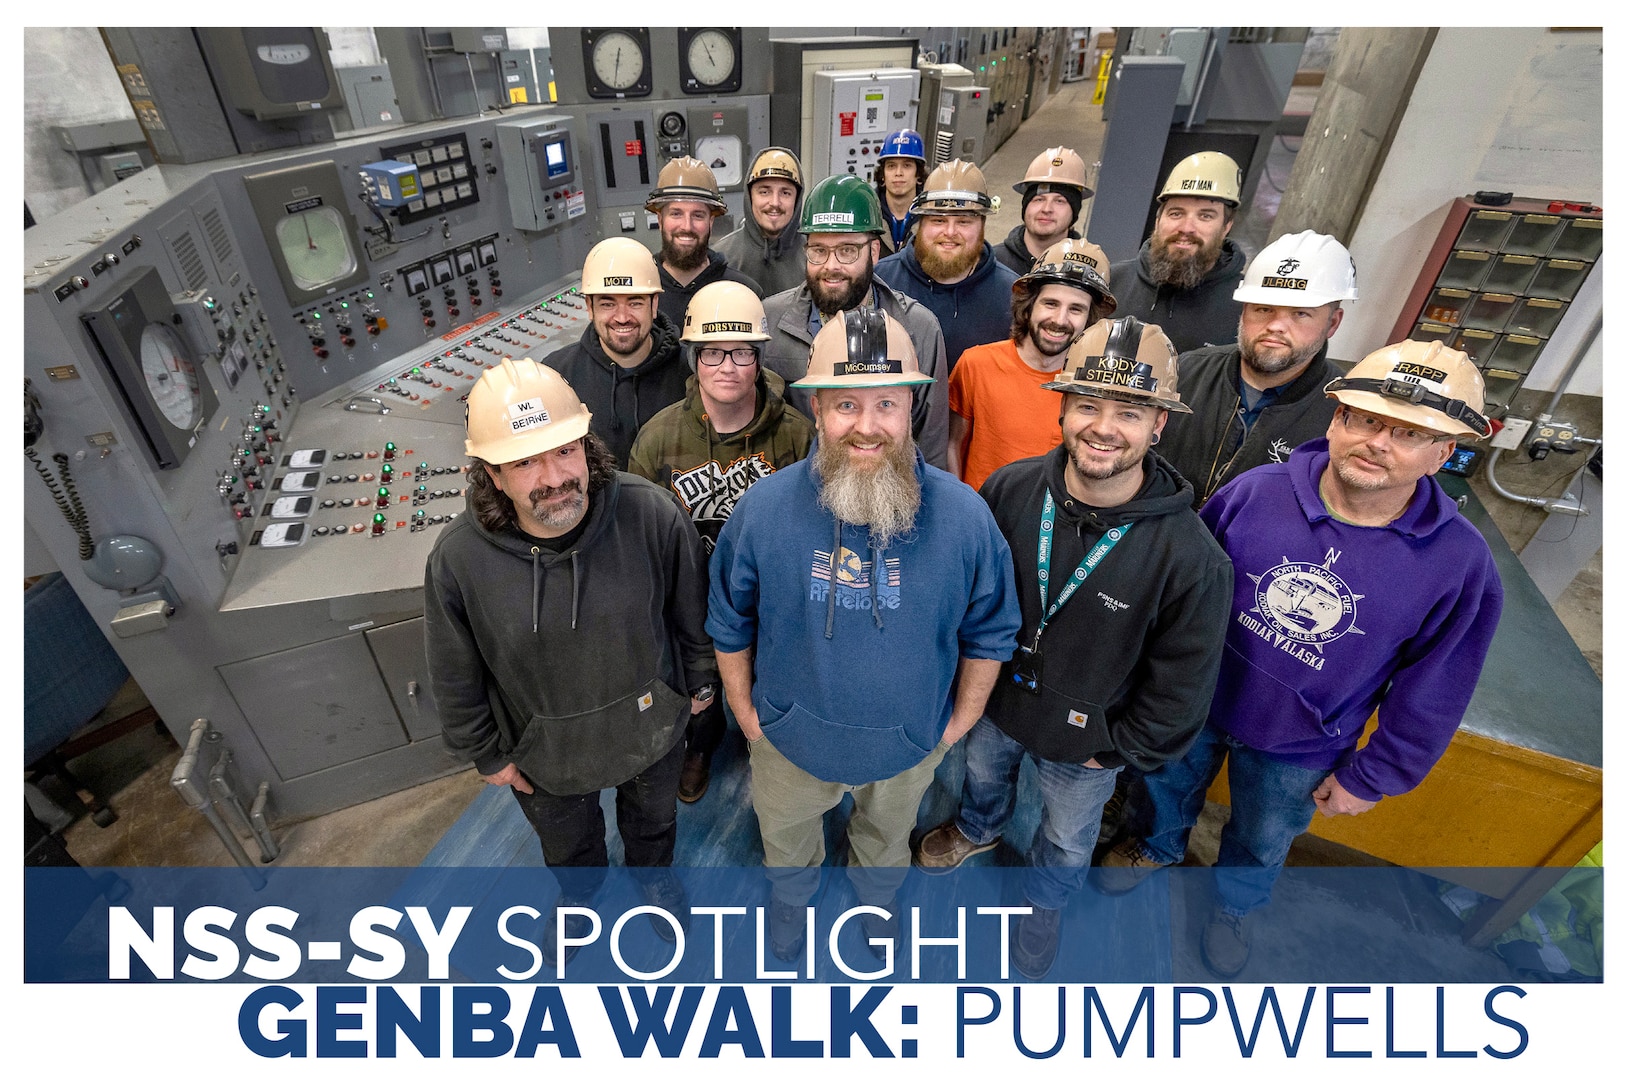 Members of the Shop 99, Temporary Services, pumpwell team pose for a picture inside the Dry Dock 6 Pumpwell March 15, 2023 at Puget Sound Naval Shipyard & Intermediate Maintenance Facility in Bremerton, Washington. Team members support the fleet and shipyard operations every day, both during and between dockings and undockings. The shipyard's dry docks and pumpwells were built between 1894 and 1963, so the system undergoes continual maintenance. (U.S. Navy photo by Scott Hansen)